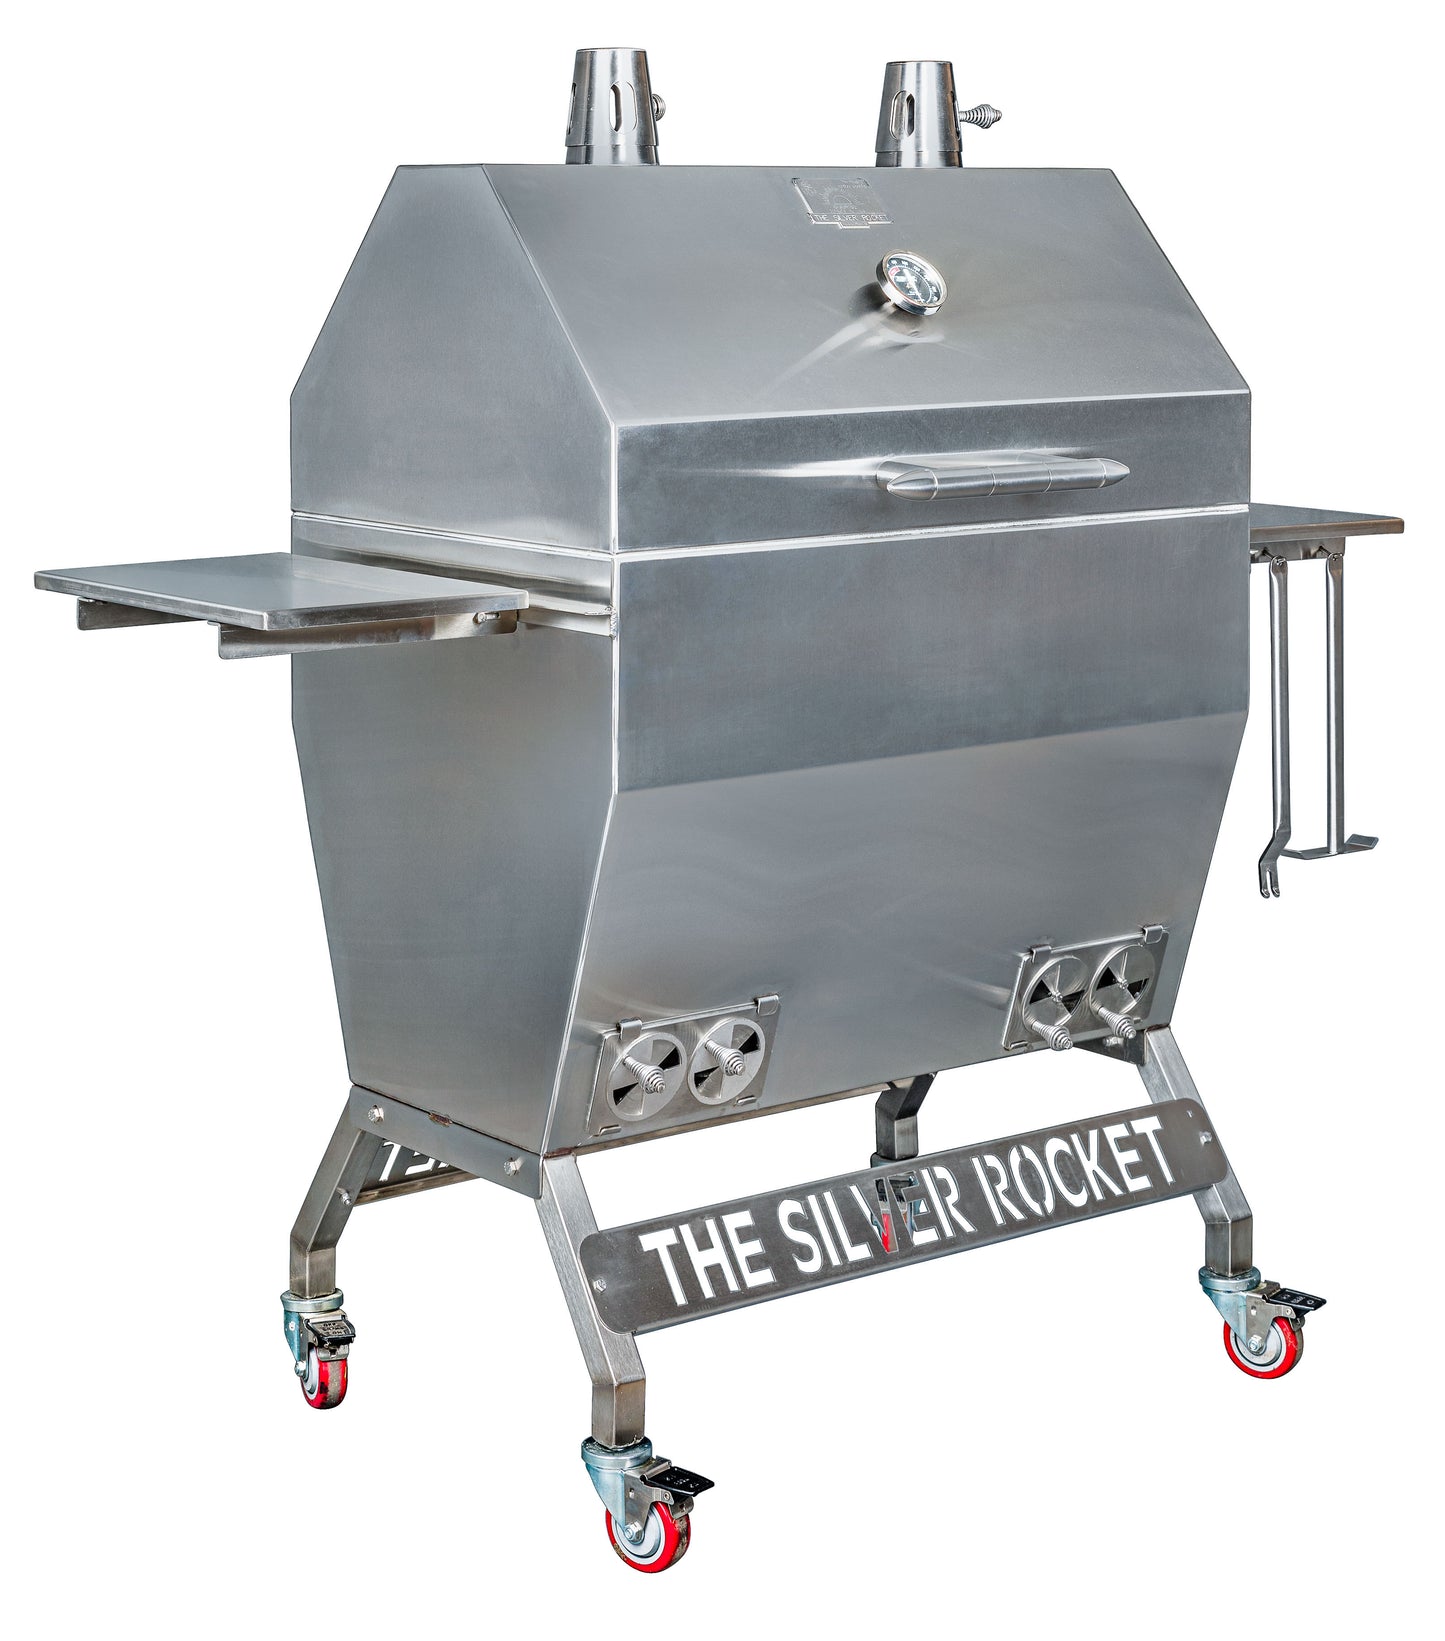 Large Silver Rocket Grill